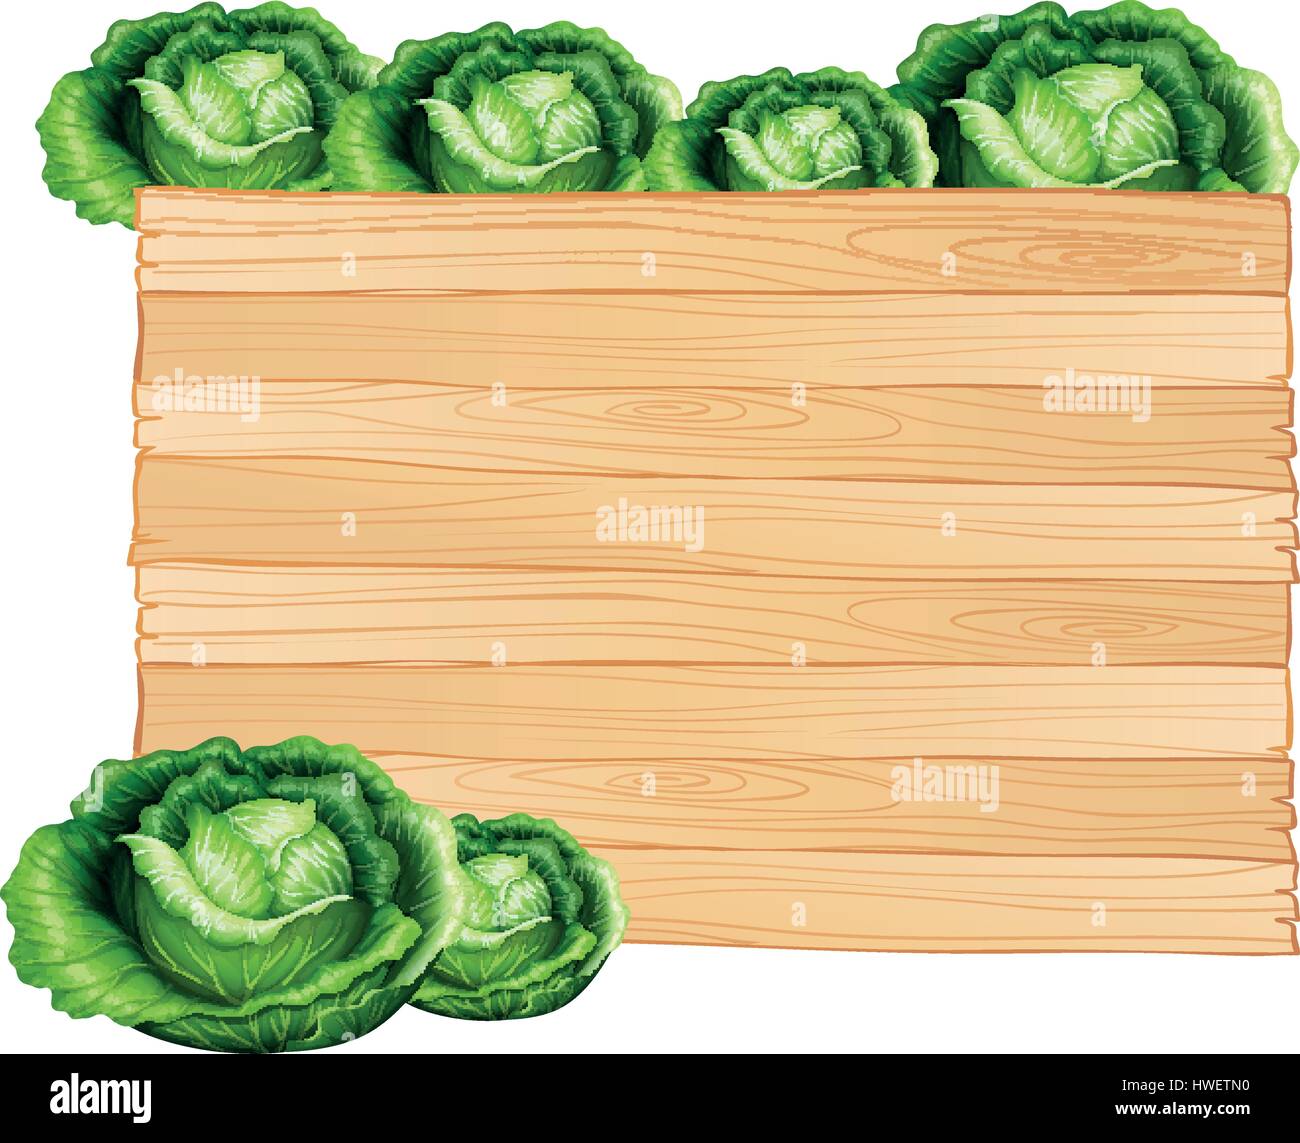 Wooden board and cabbages illustration Stock Vector